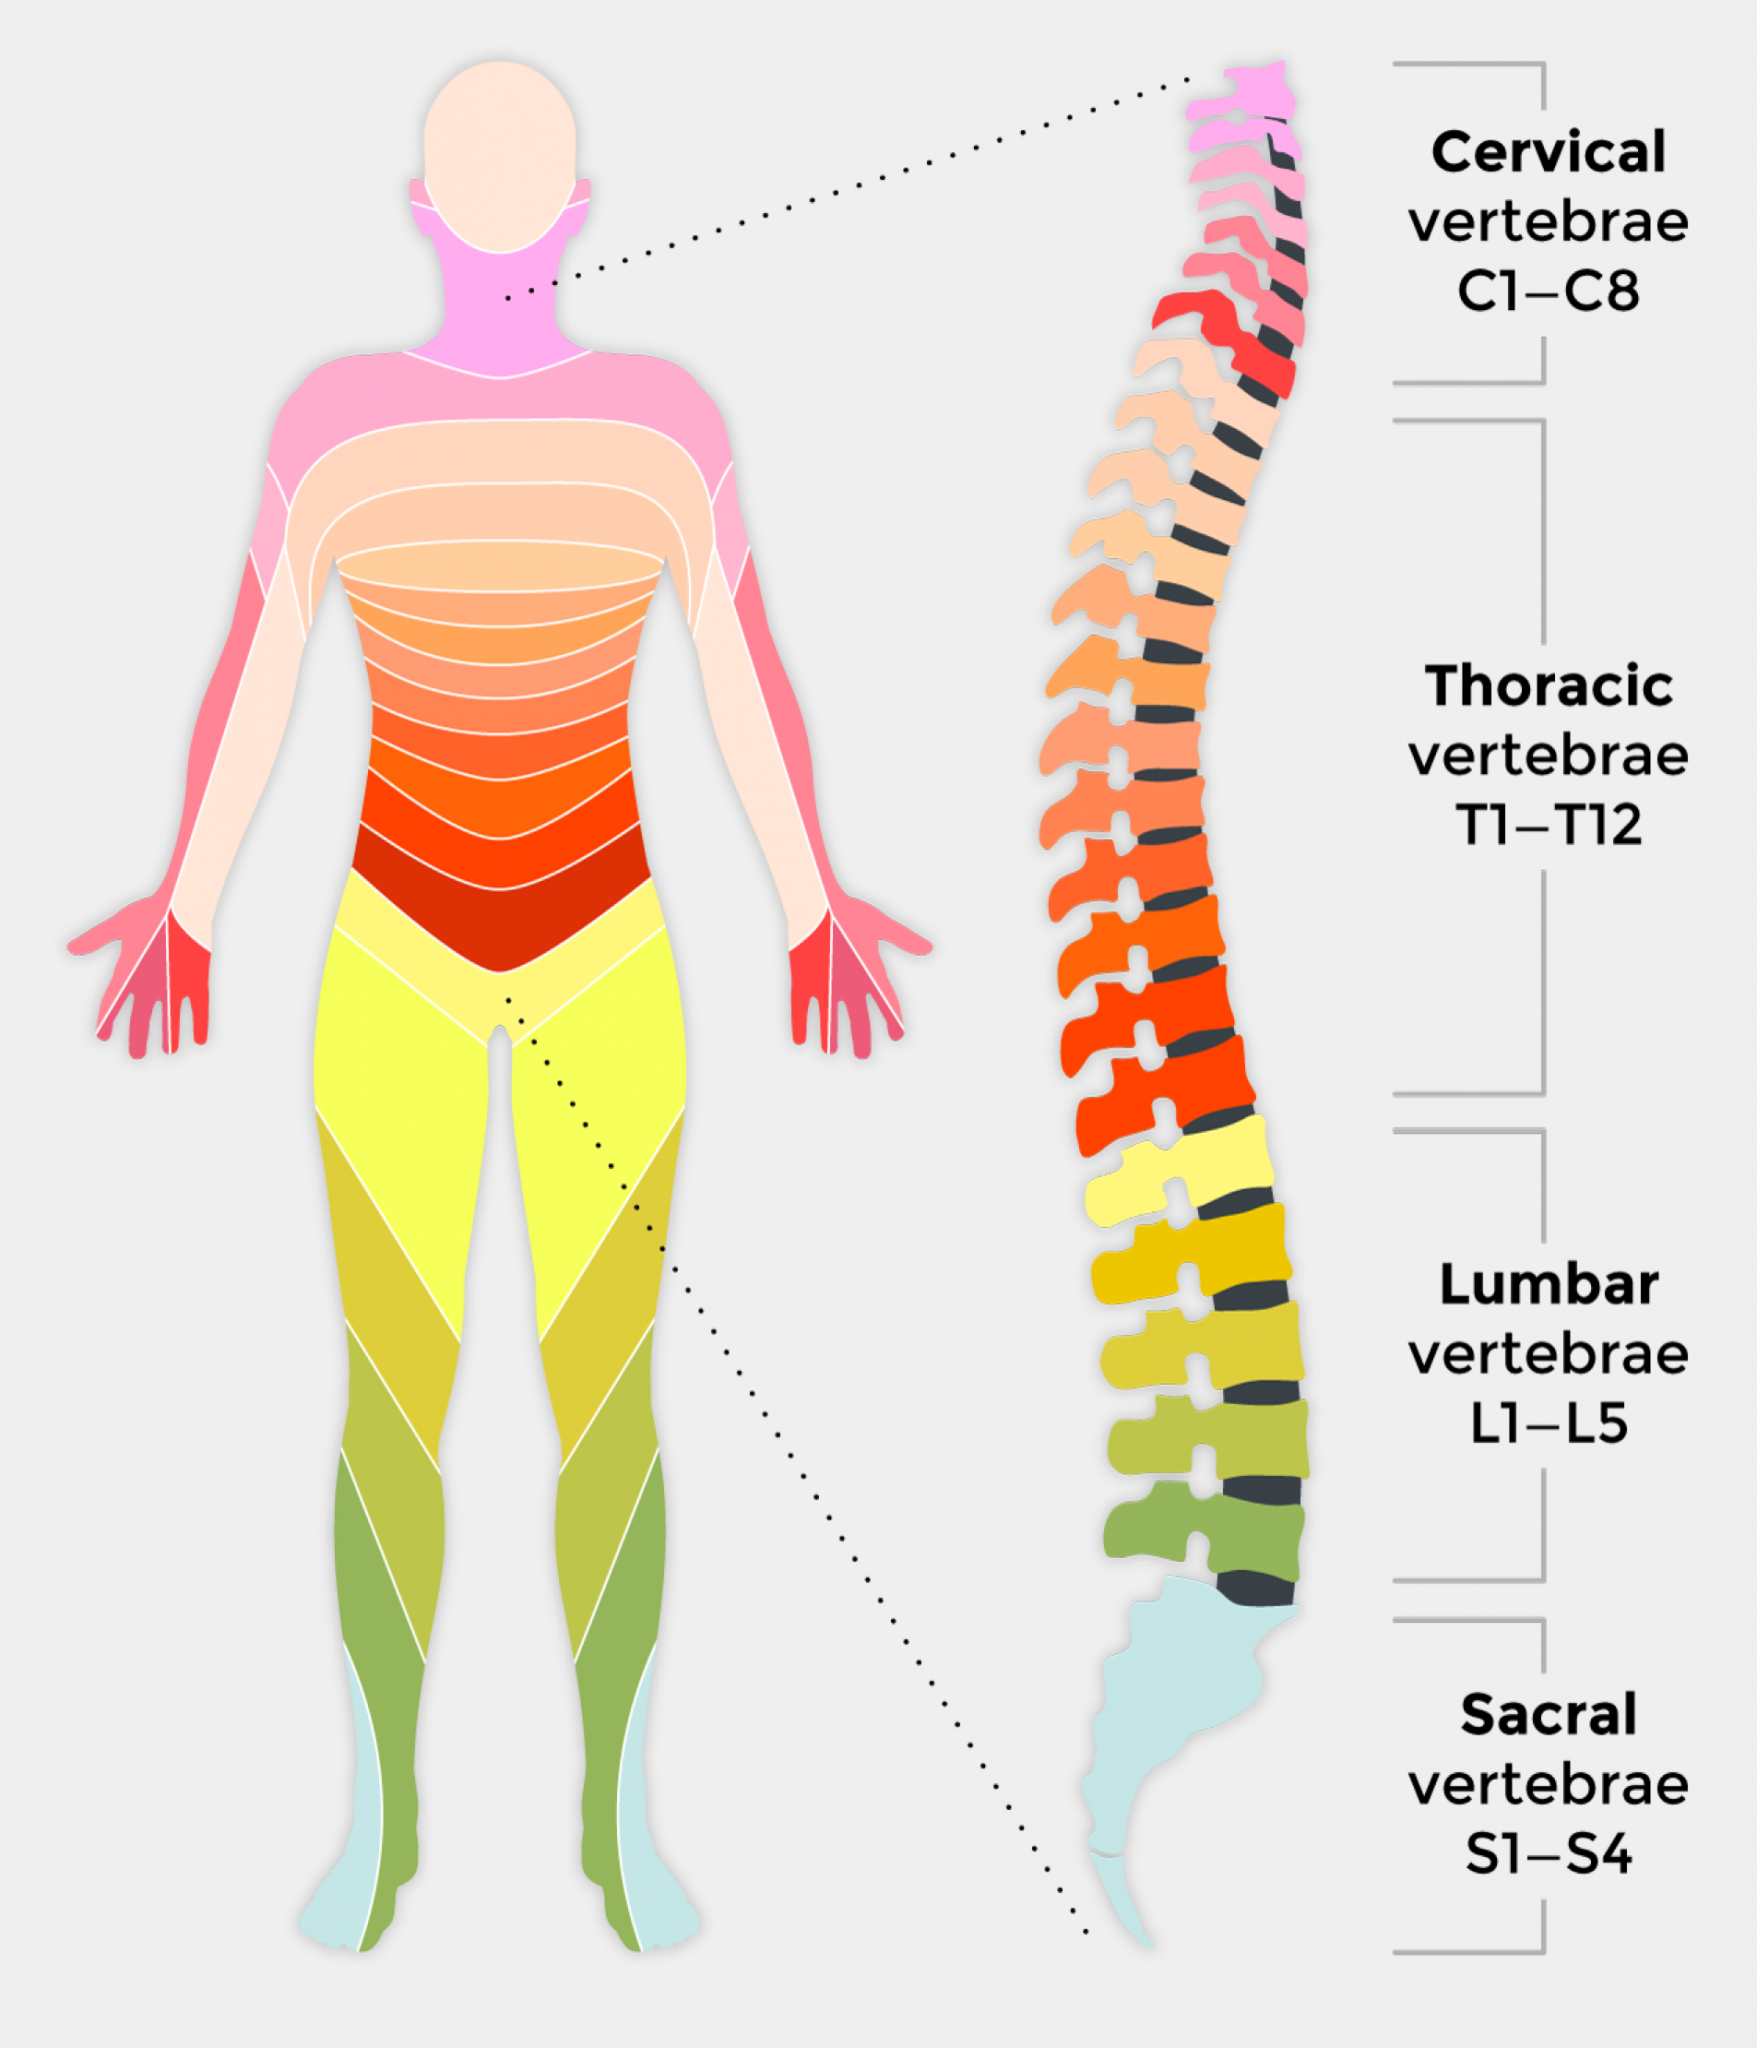 What is the most common area of spinal cord injury?